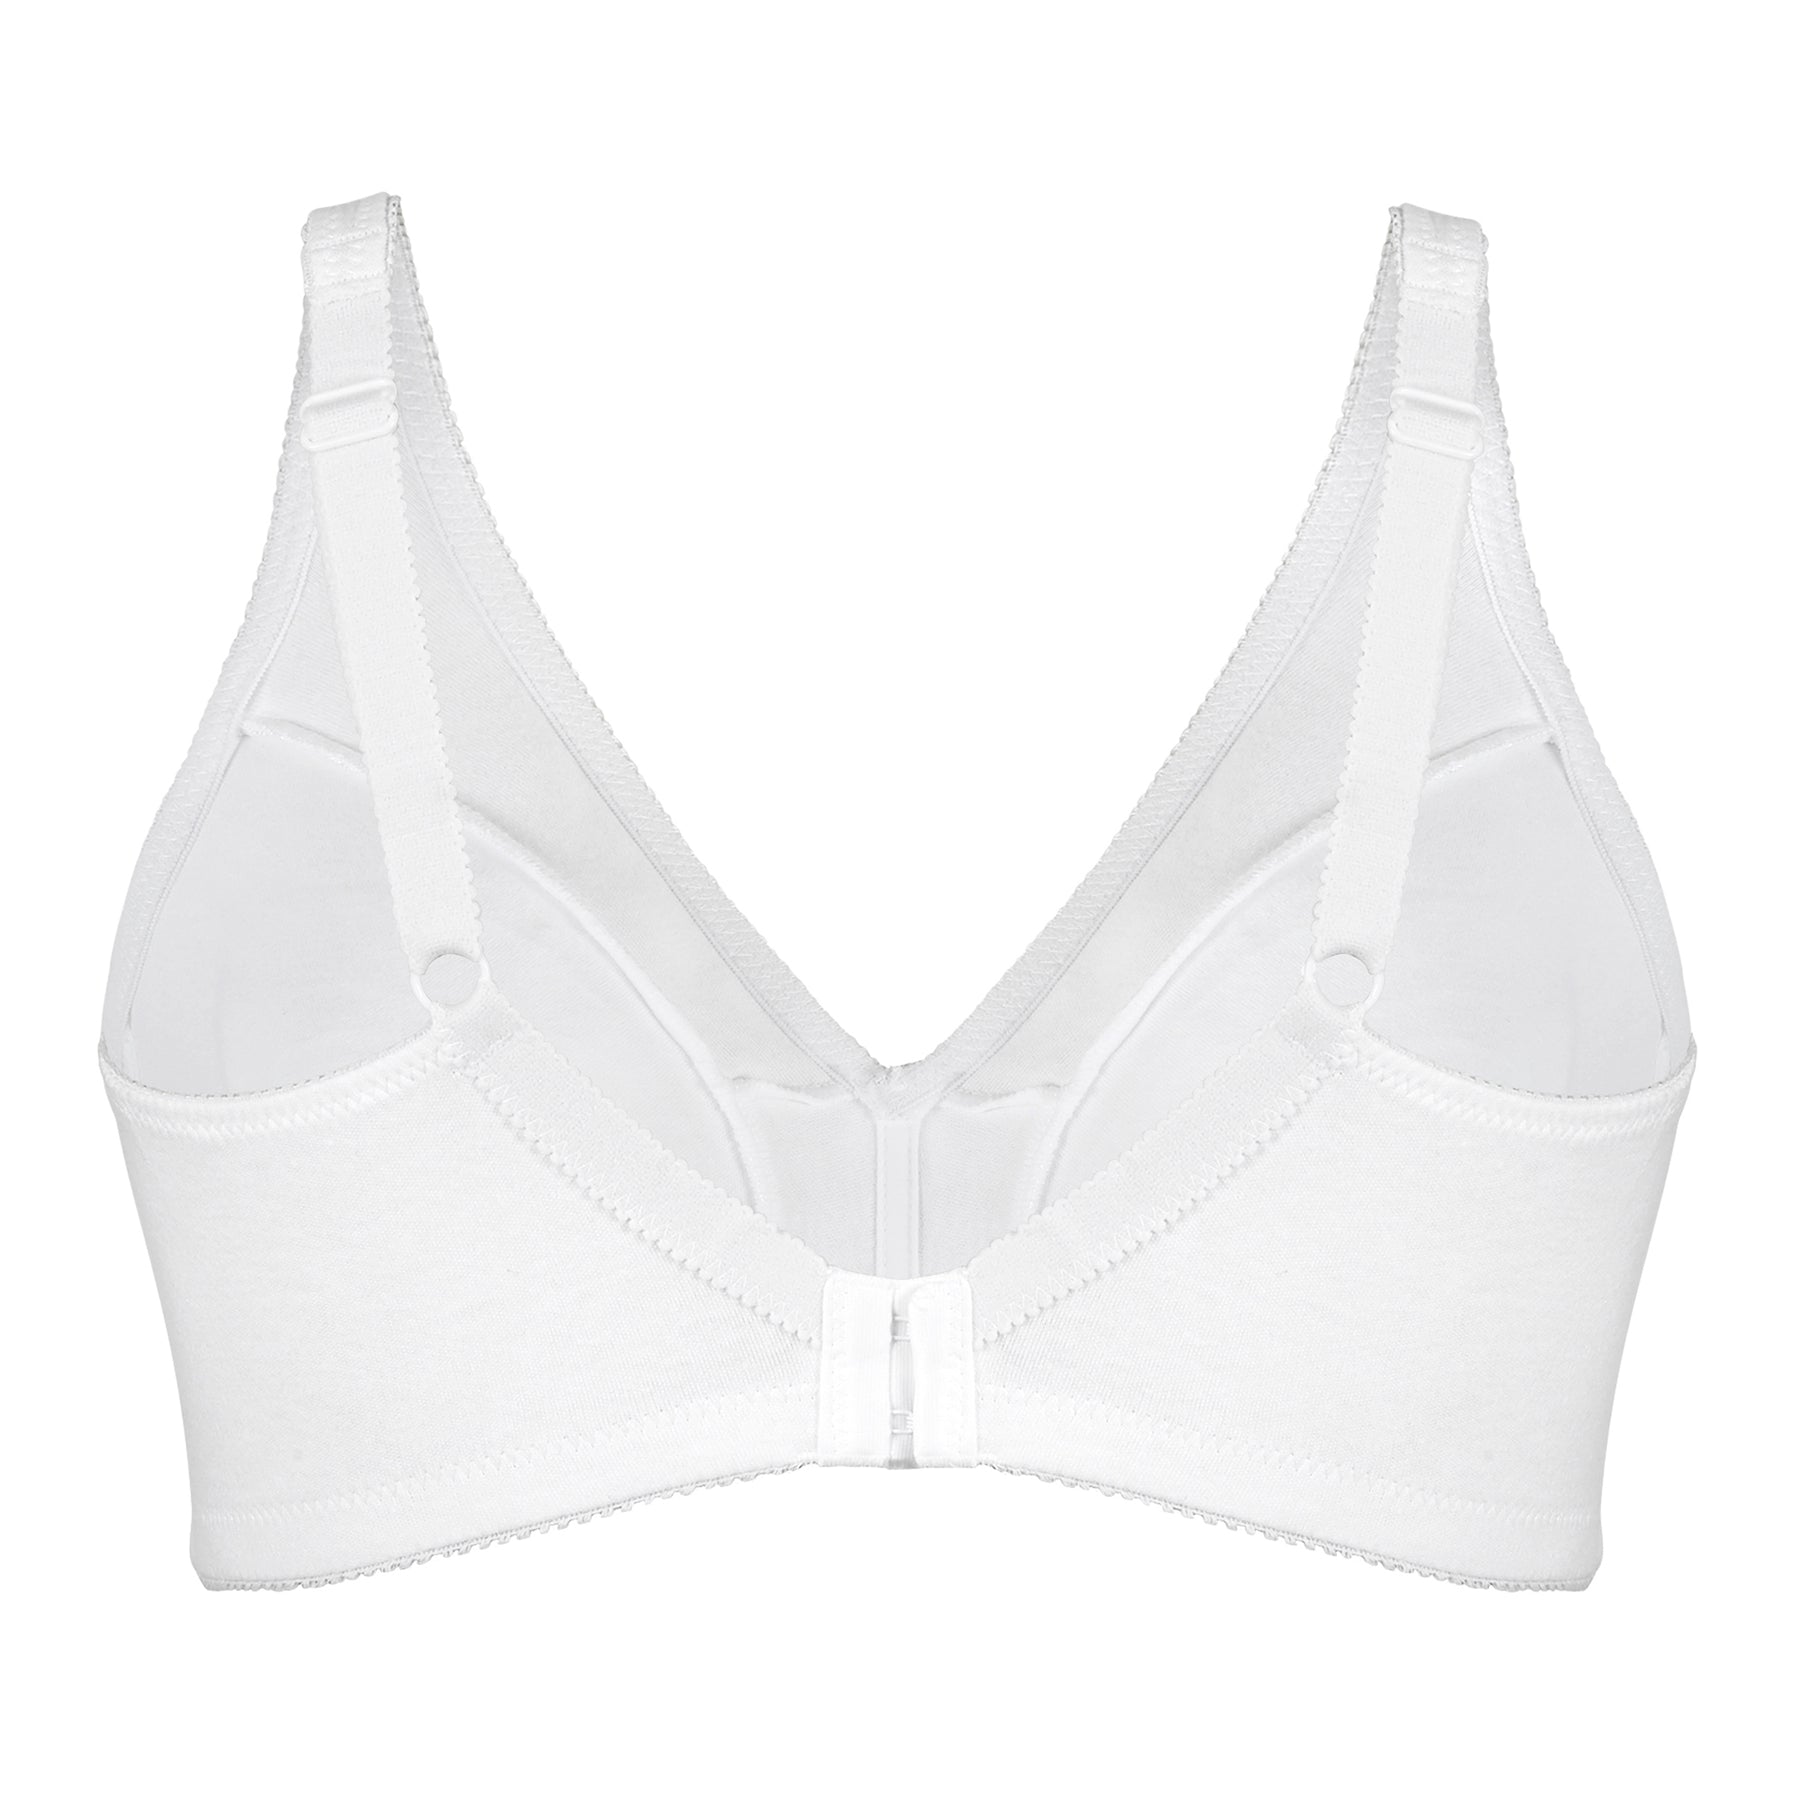 Buy ANGELFORM Women's Cotton Non Padded Wire Free Full-Coverage